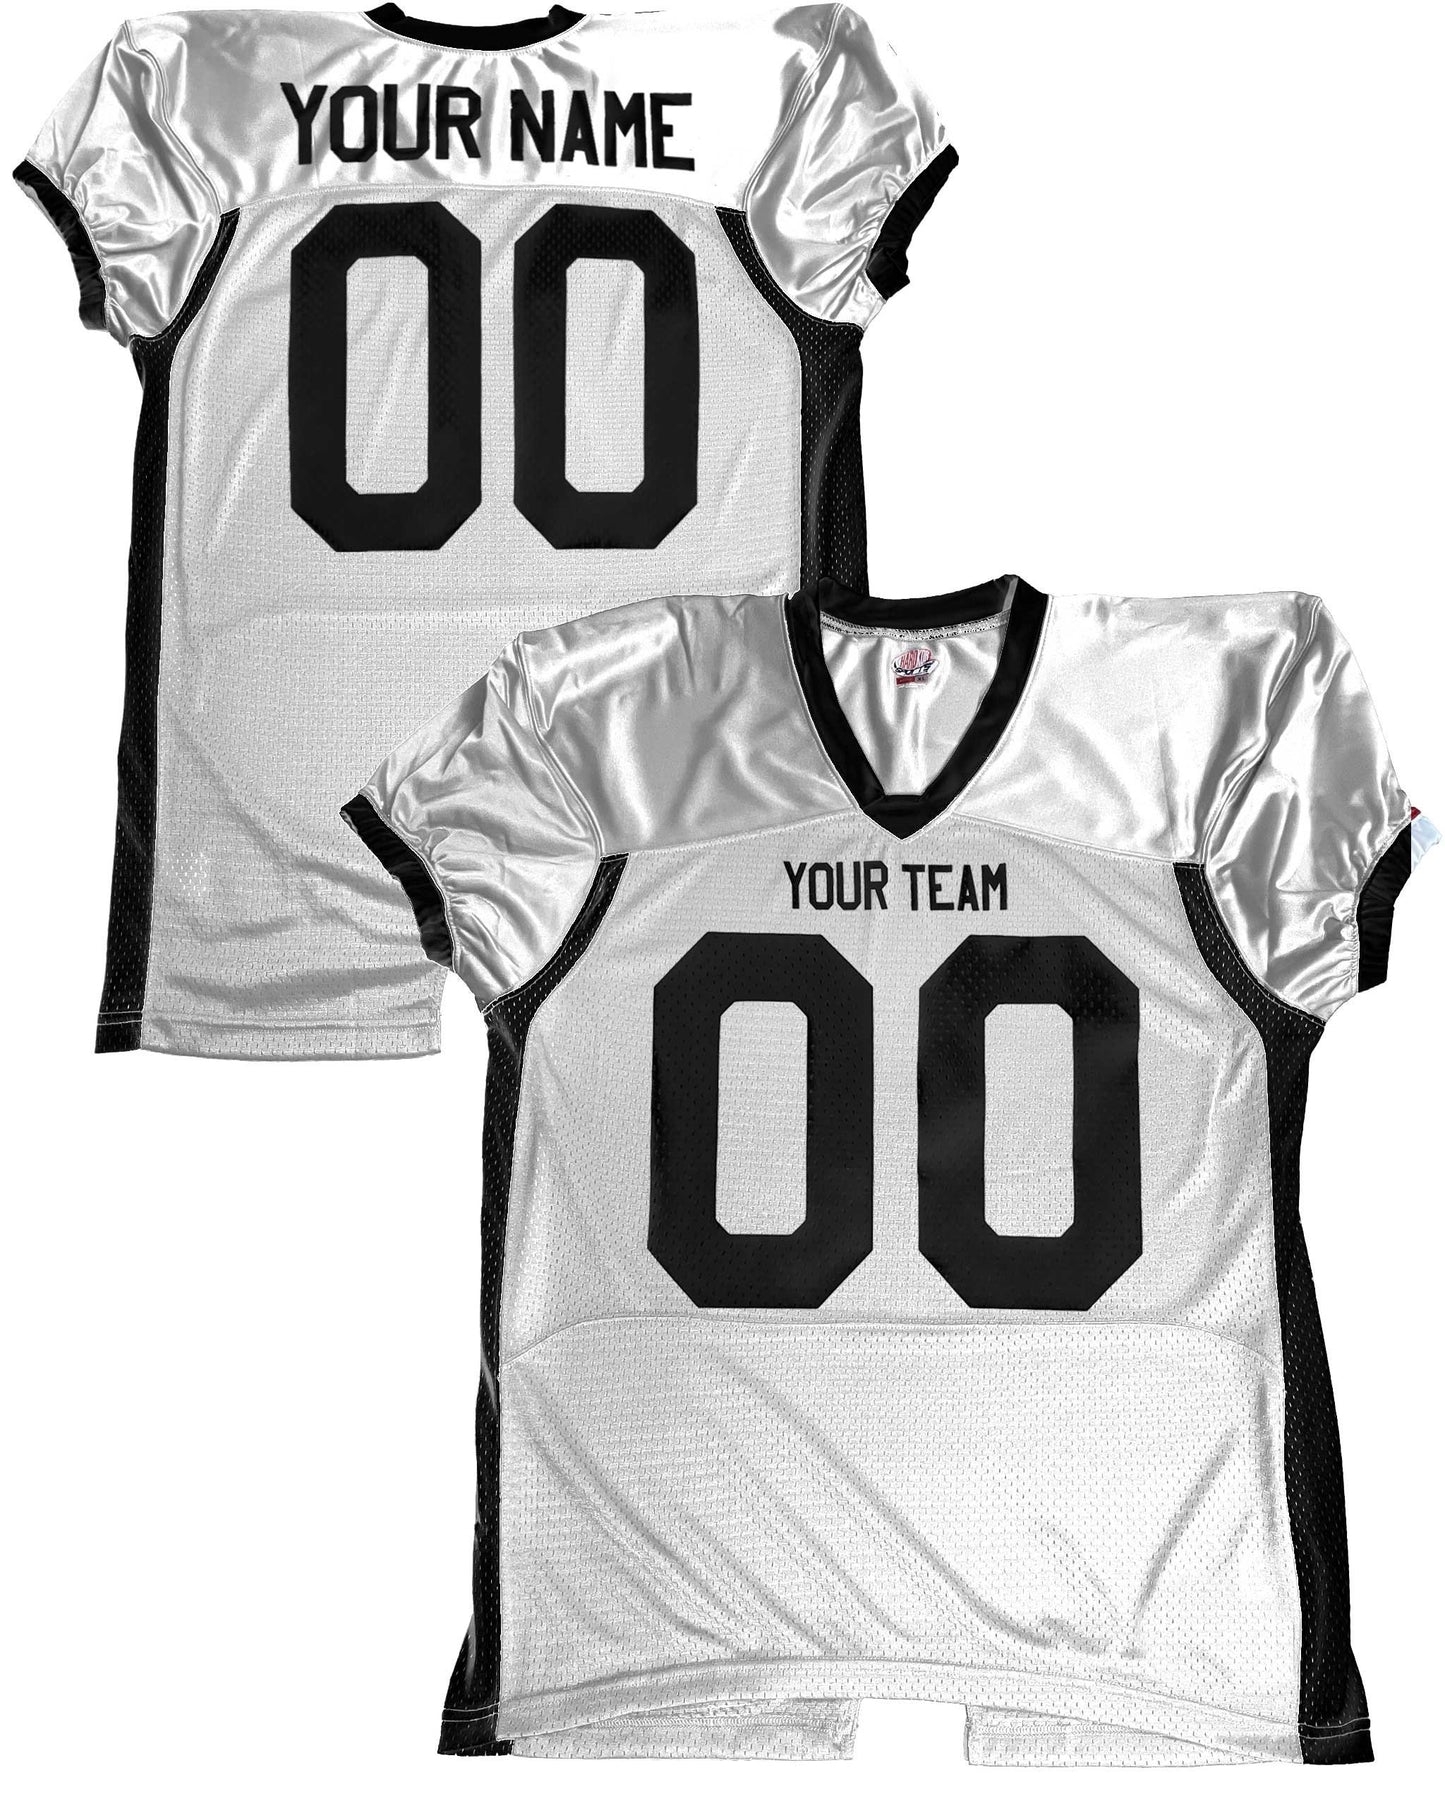 Fitted Professional Custom Color Football Jersey Dark Green Silver Mesh Body White with Black or Scarlet Trim Dazzle Your Names & Numbers